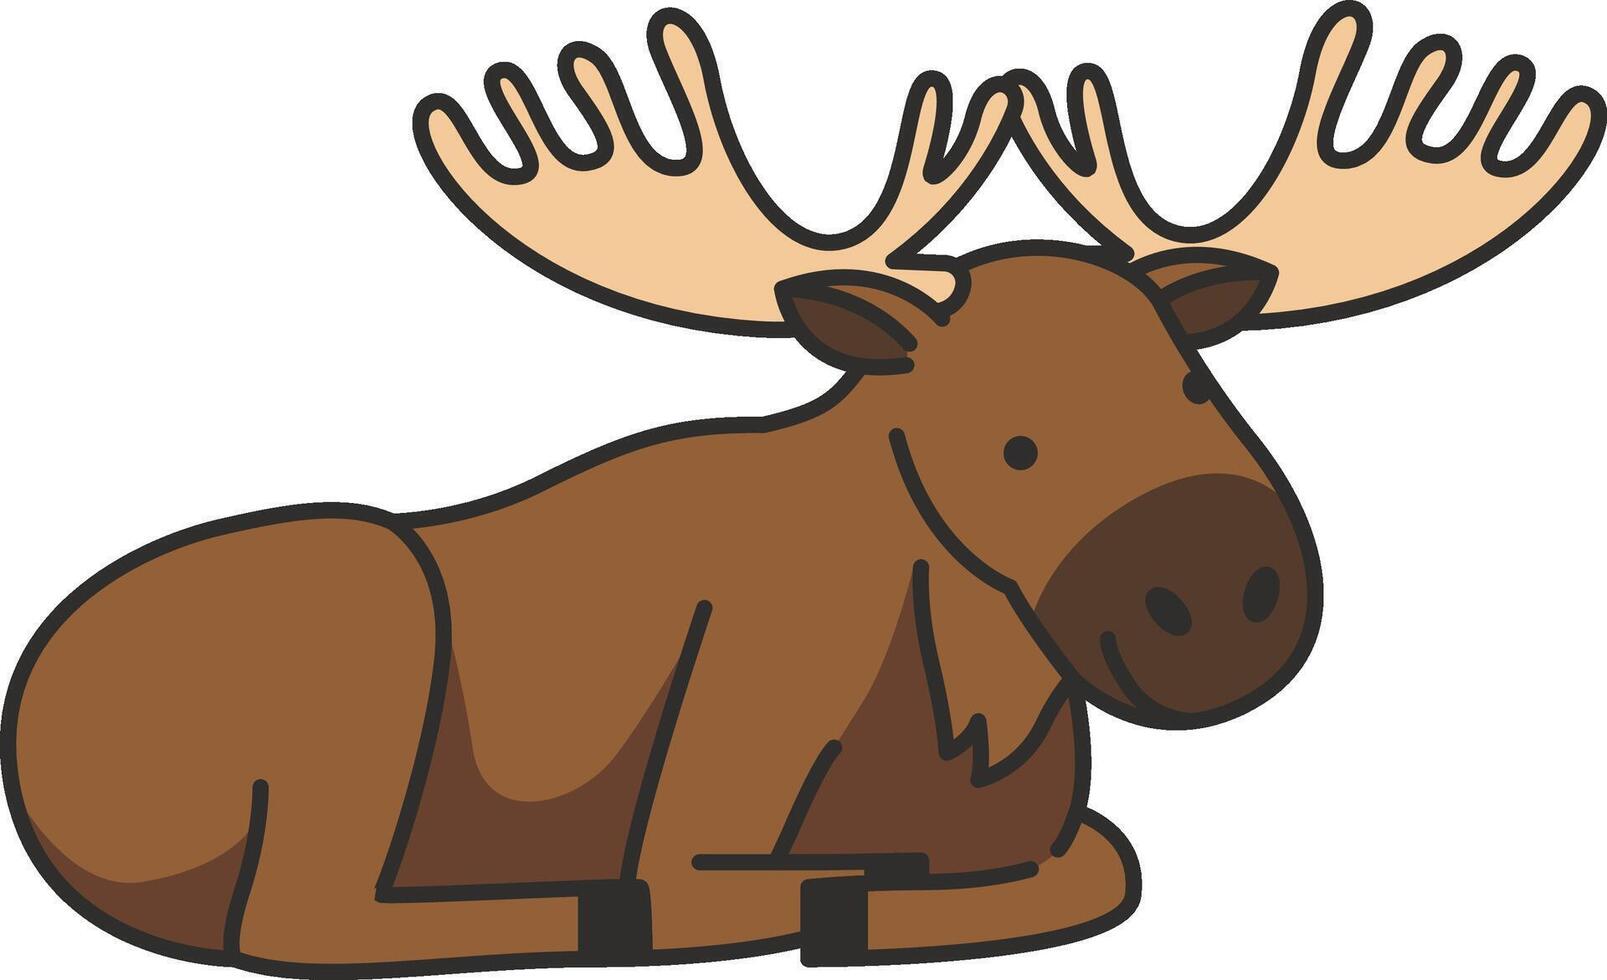 Vector illustration of a moose in cartoon style